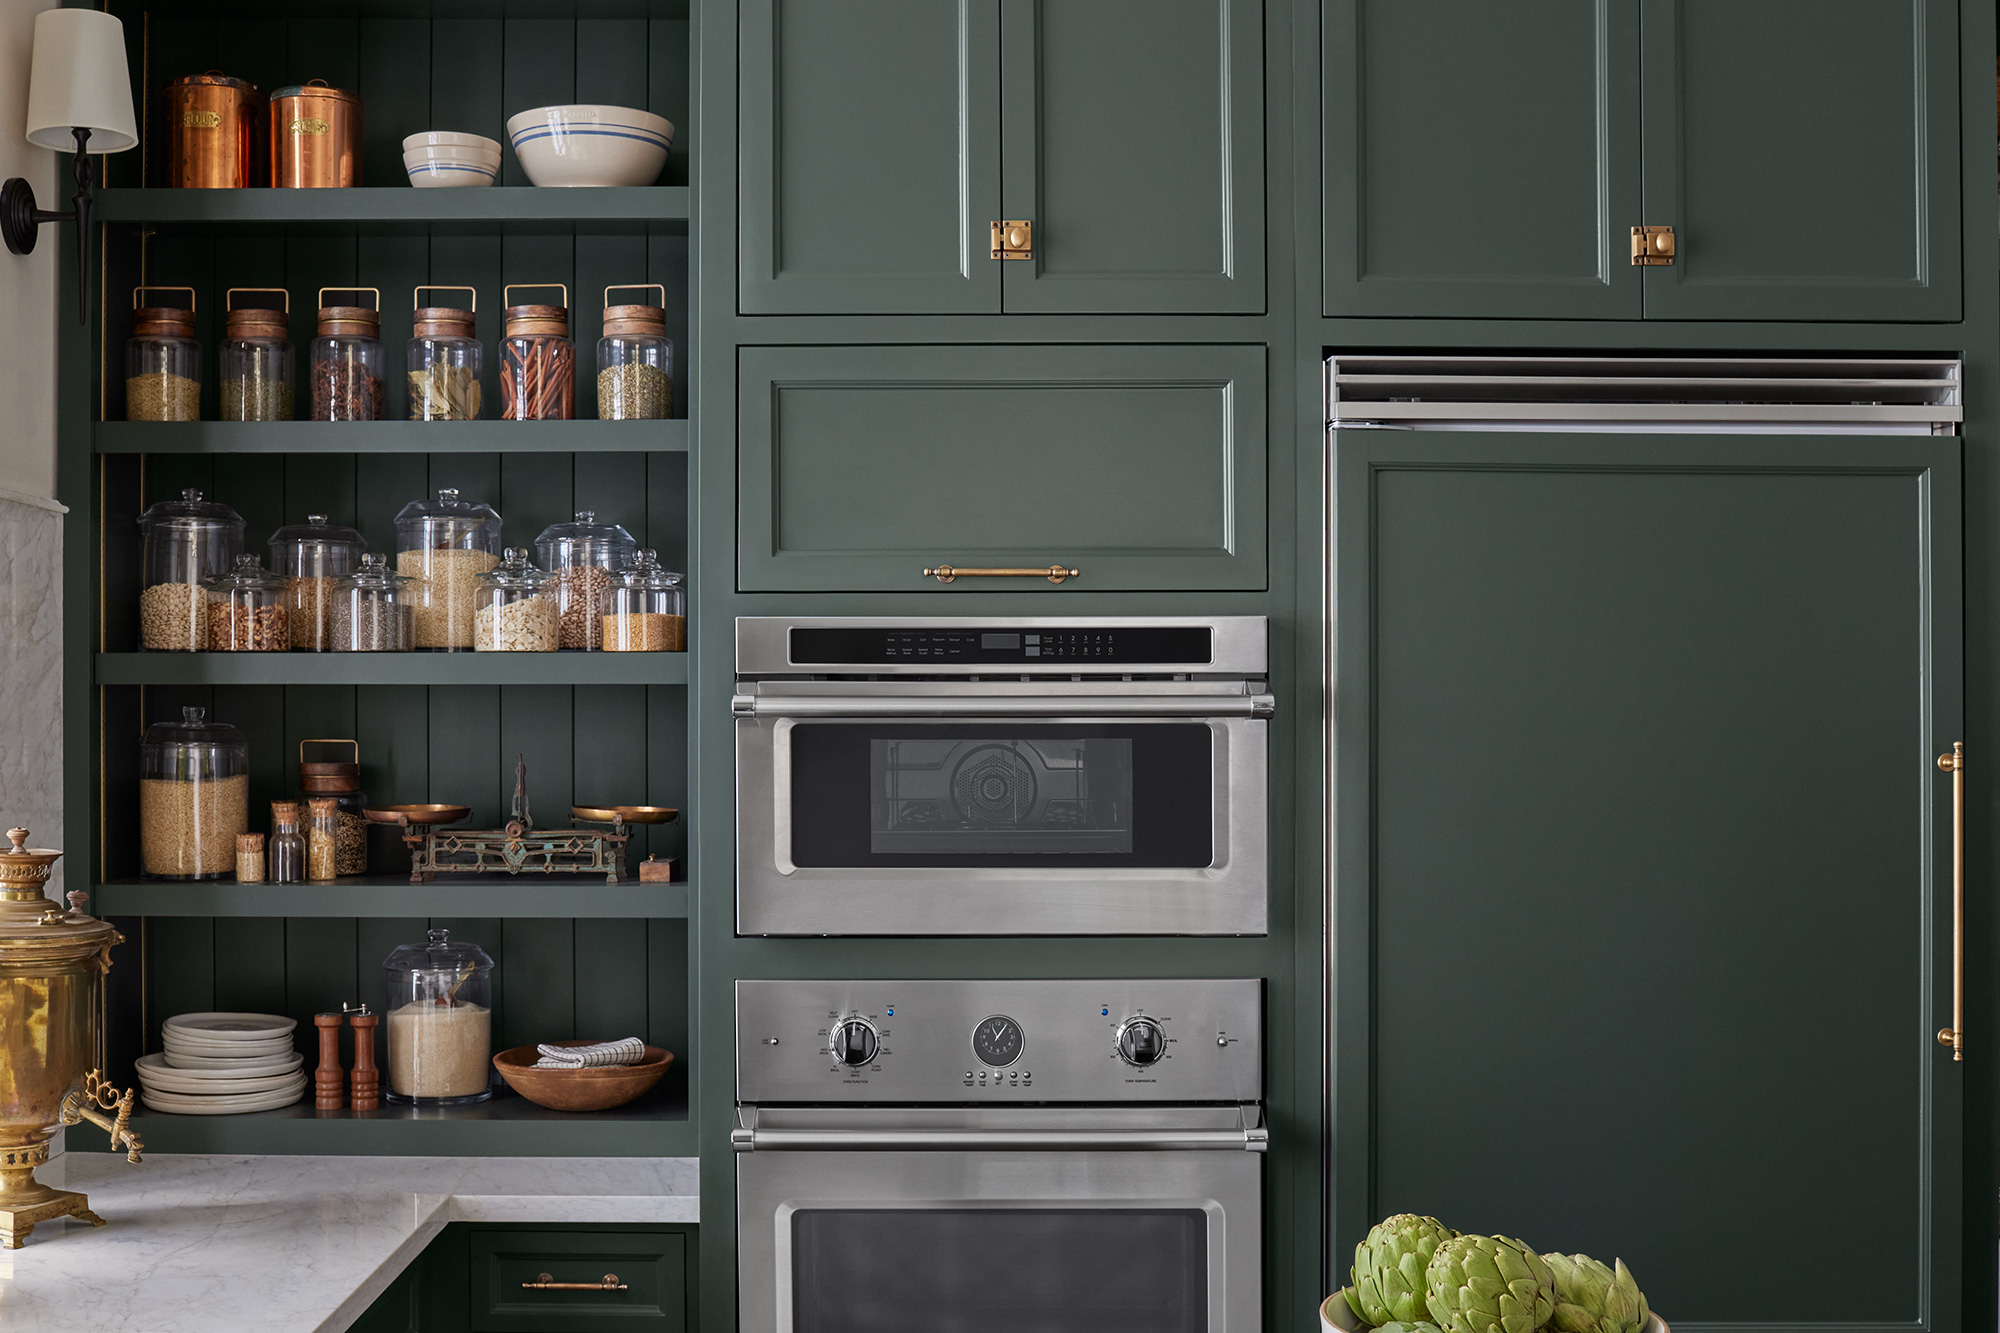 Detail image of cabinets that are painted using Magnolia Home by Joanna Gaines cabinet and trim paint, using the Castle Collection color Cottage Grove.